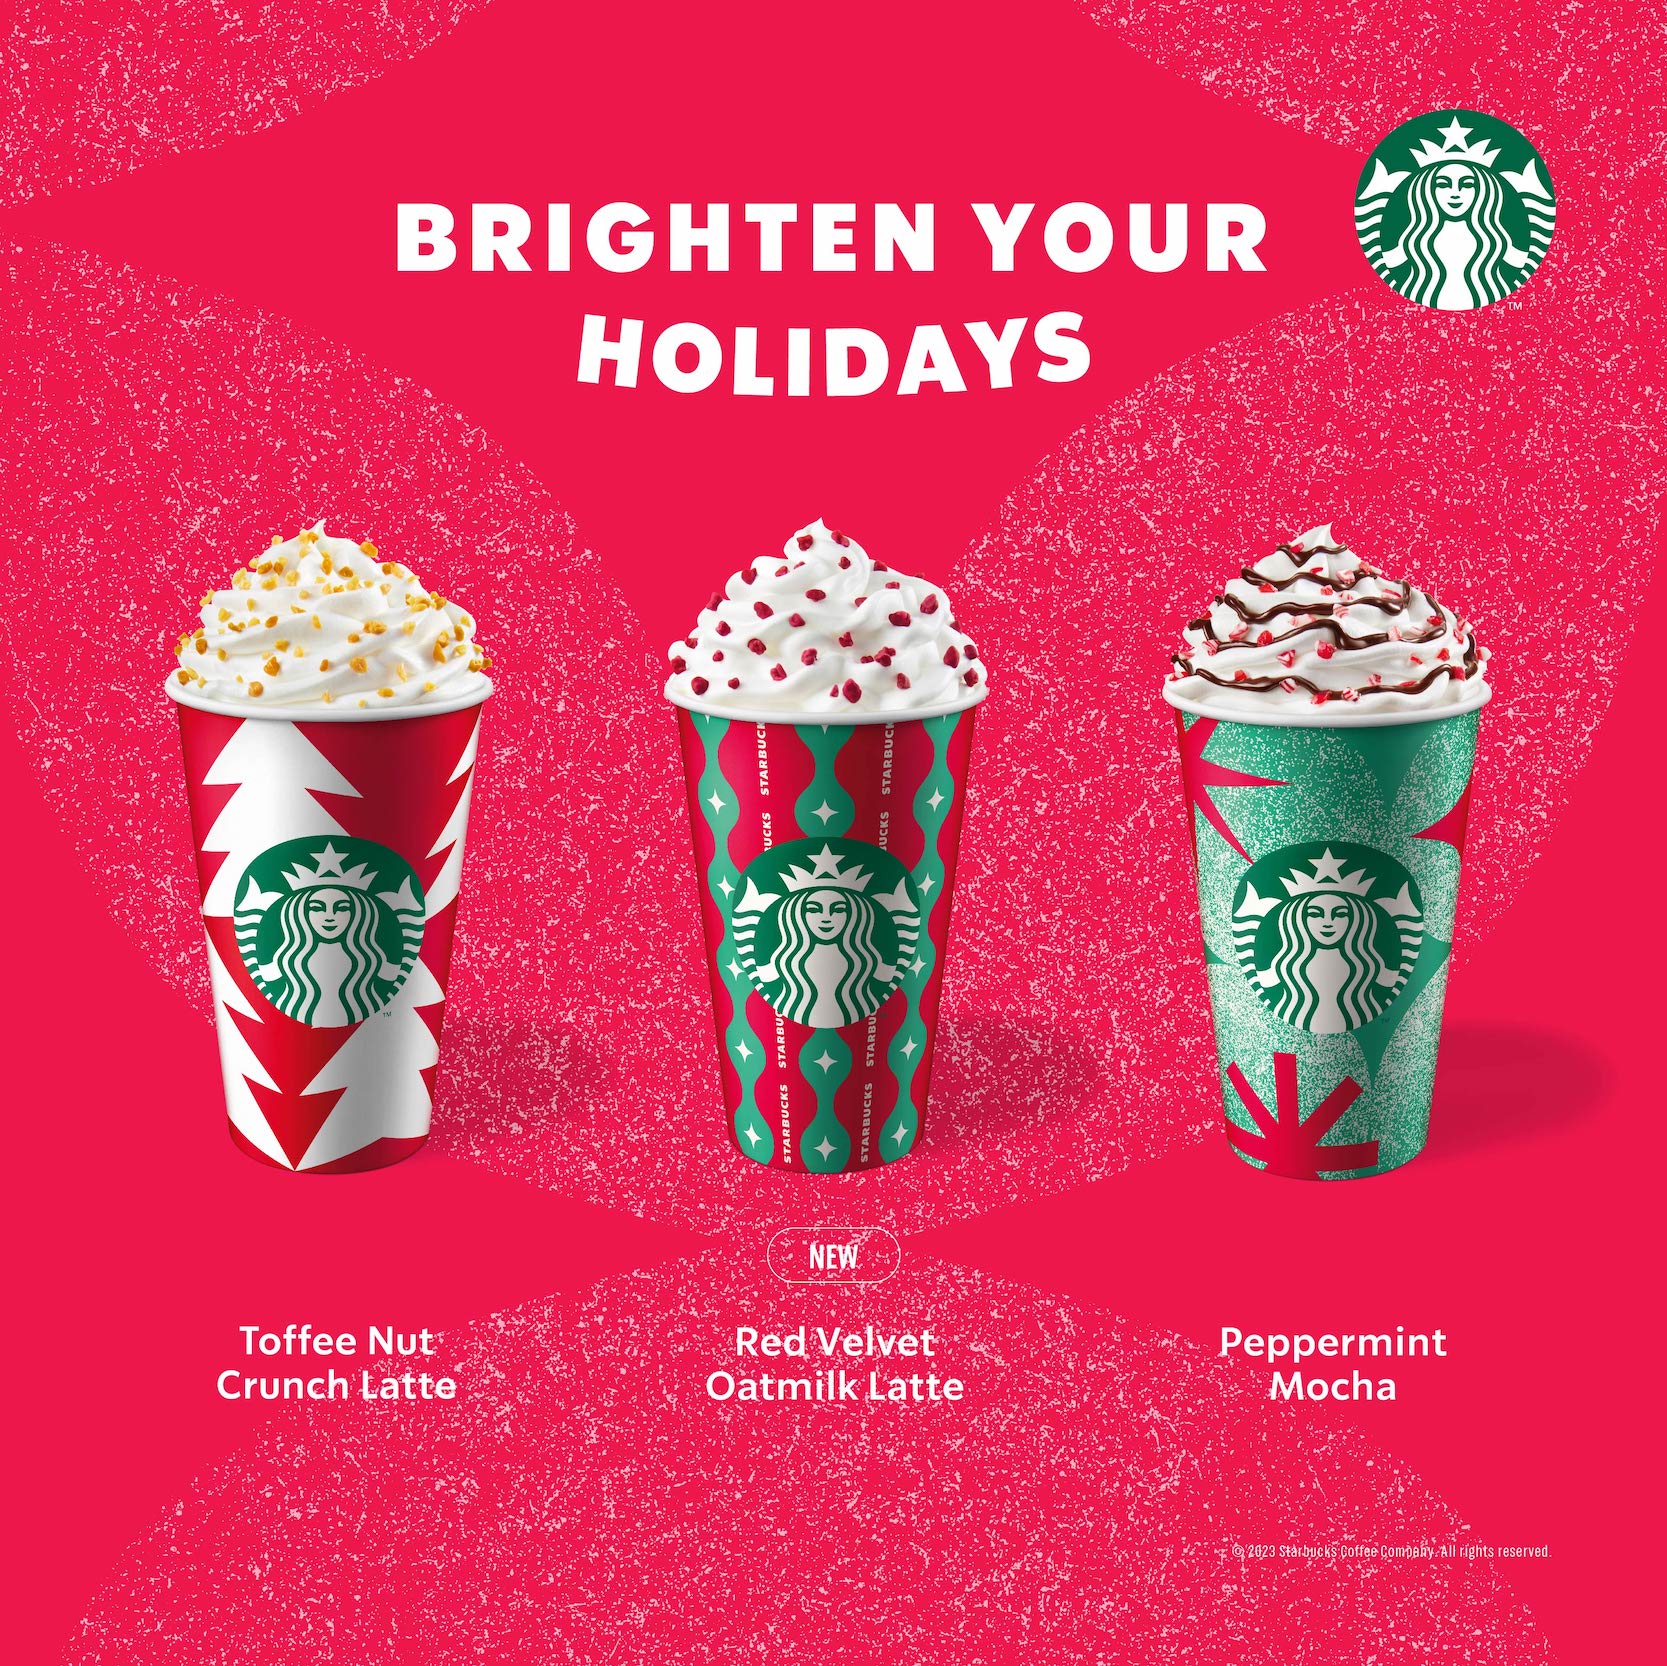 Holiday Your Way with Starbucks Malaysia This Merry Season